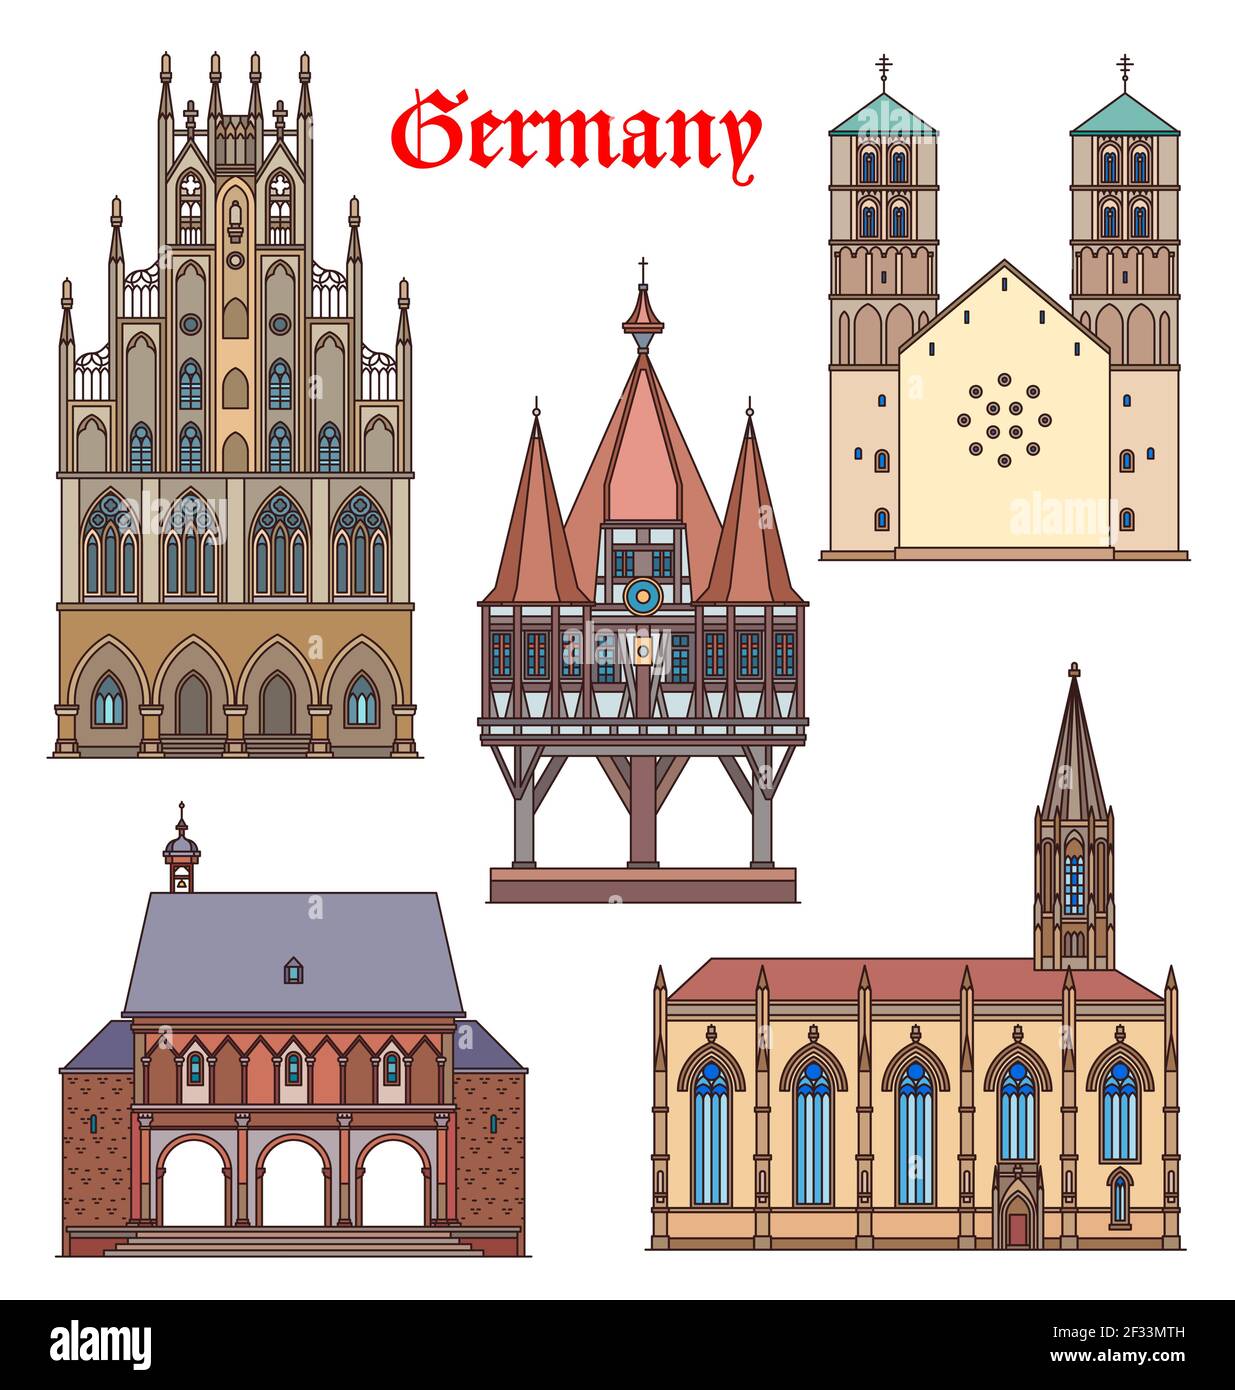 Germany landmark buildings, cathedrals, German travel famous architecture, vector. St Lambert catholic church and rathaus in Munster Westphalia, St Pa Stock Vector